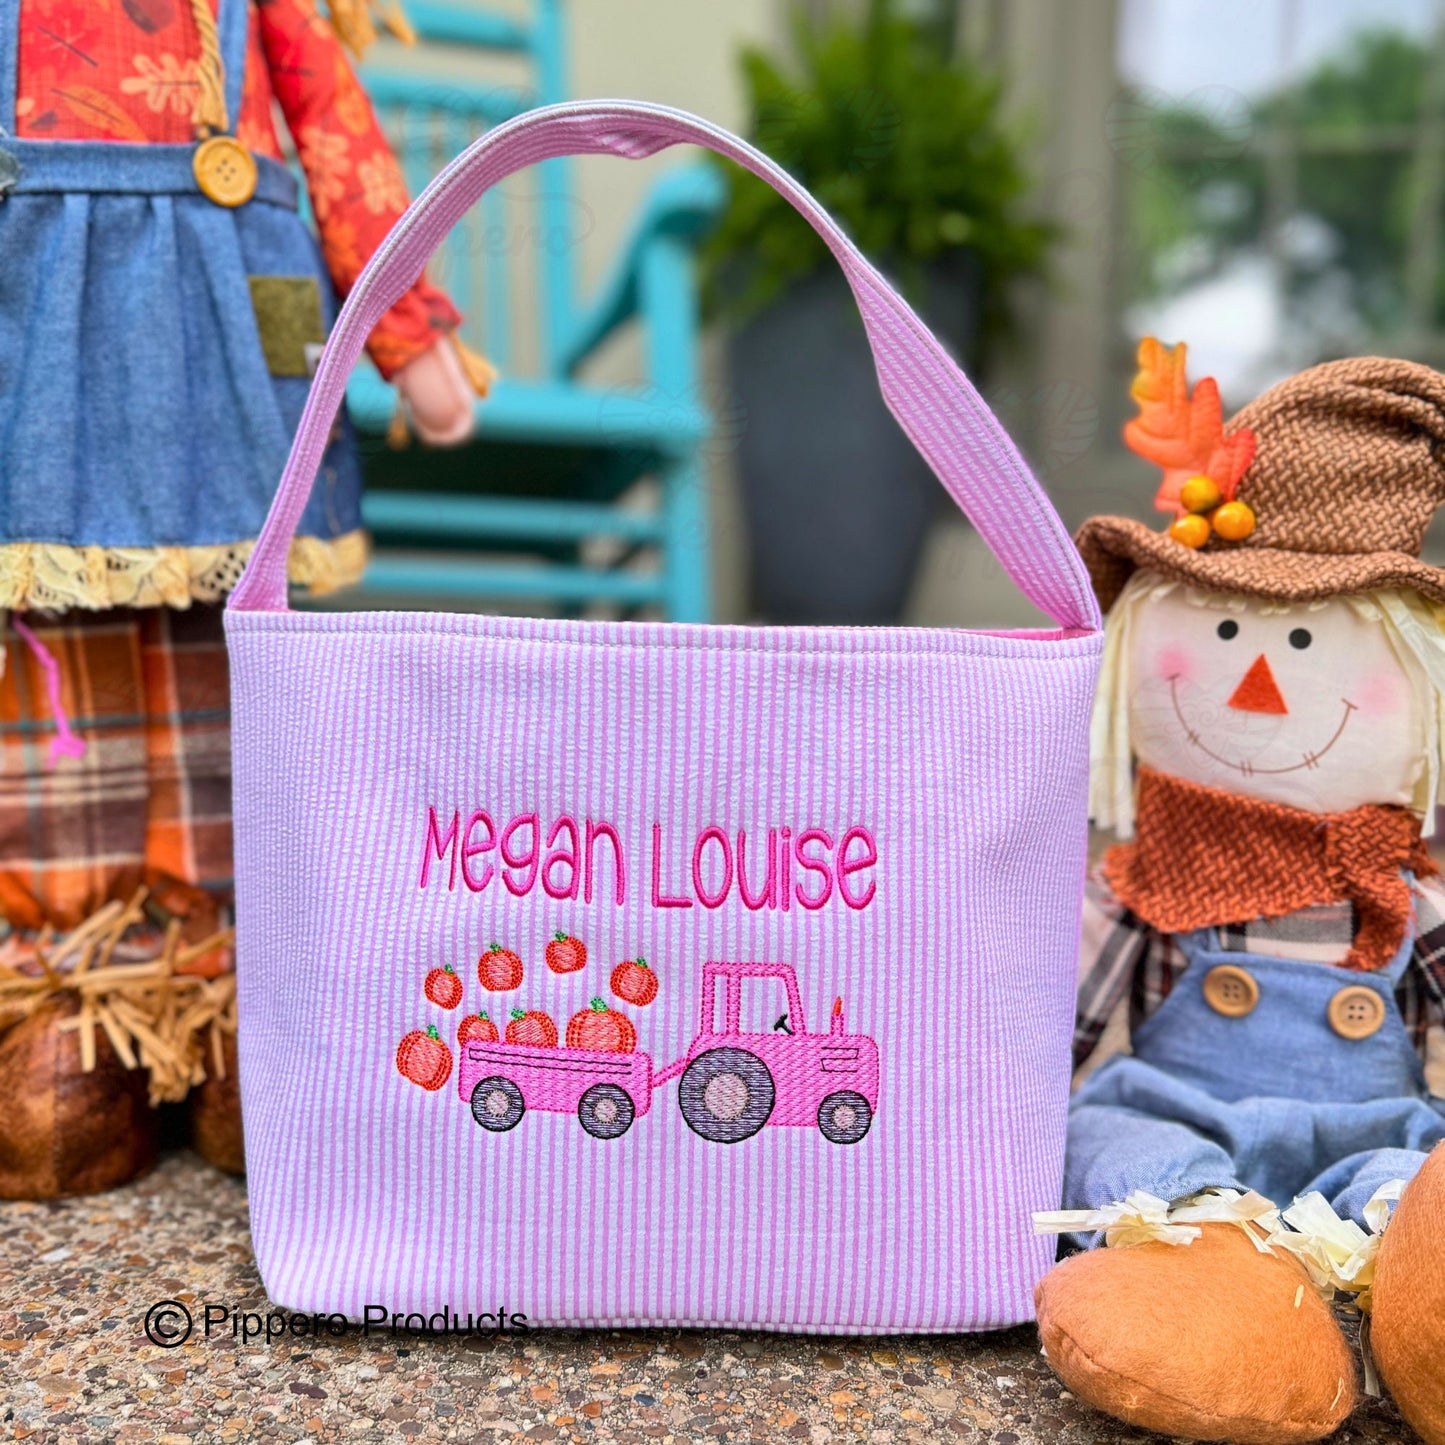 Personalized Embroidered Trick or Treat, Trunk or Treat Halloween Candy Bag Basket Bucket Tote with Seersucker Tractor Design Gift for Boy or Girl